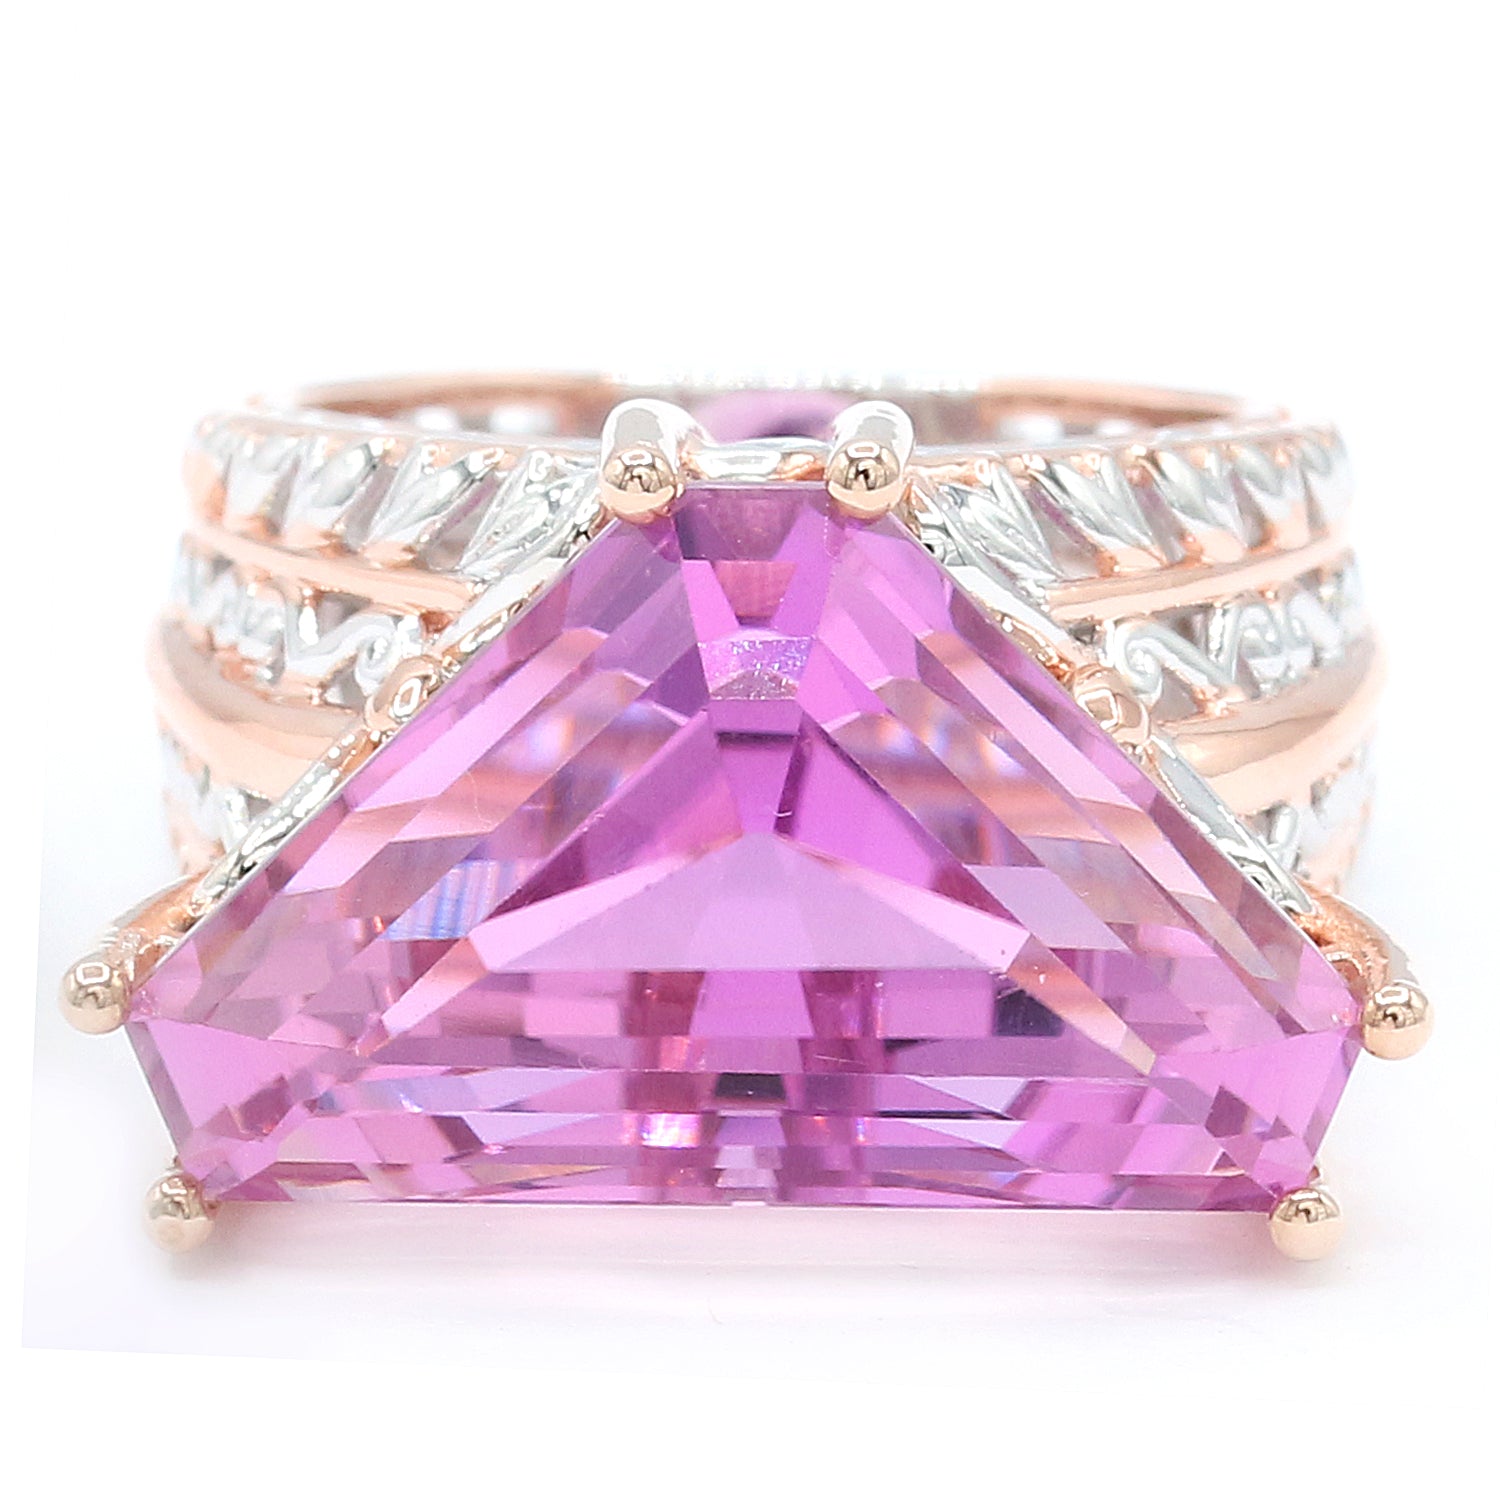 Limited Edition Gems en Vogue Luxe One-of-a-Kind 25.65ctw Shield Cut Kunzite & White Zircon Ring